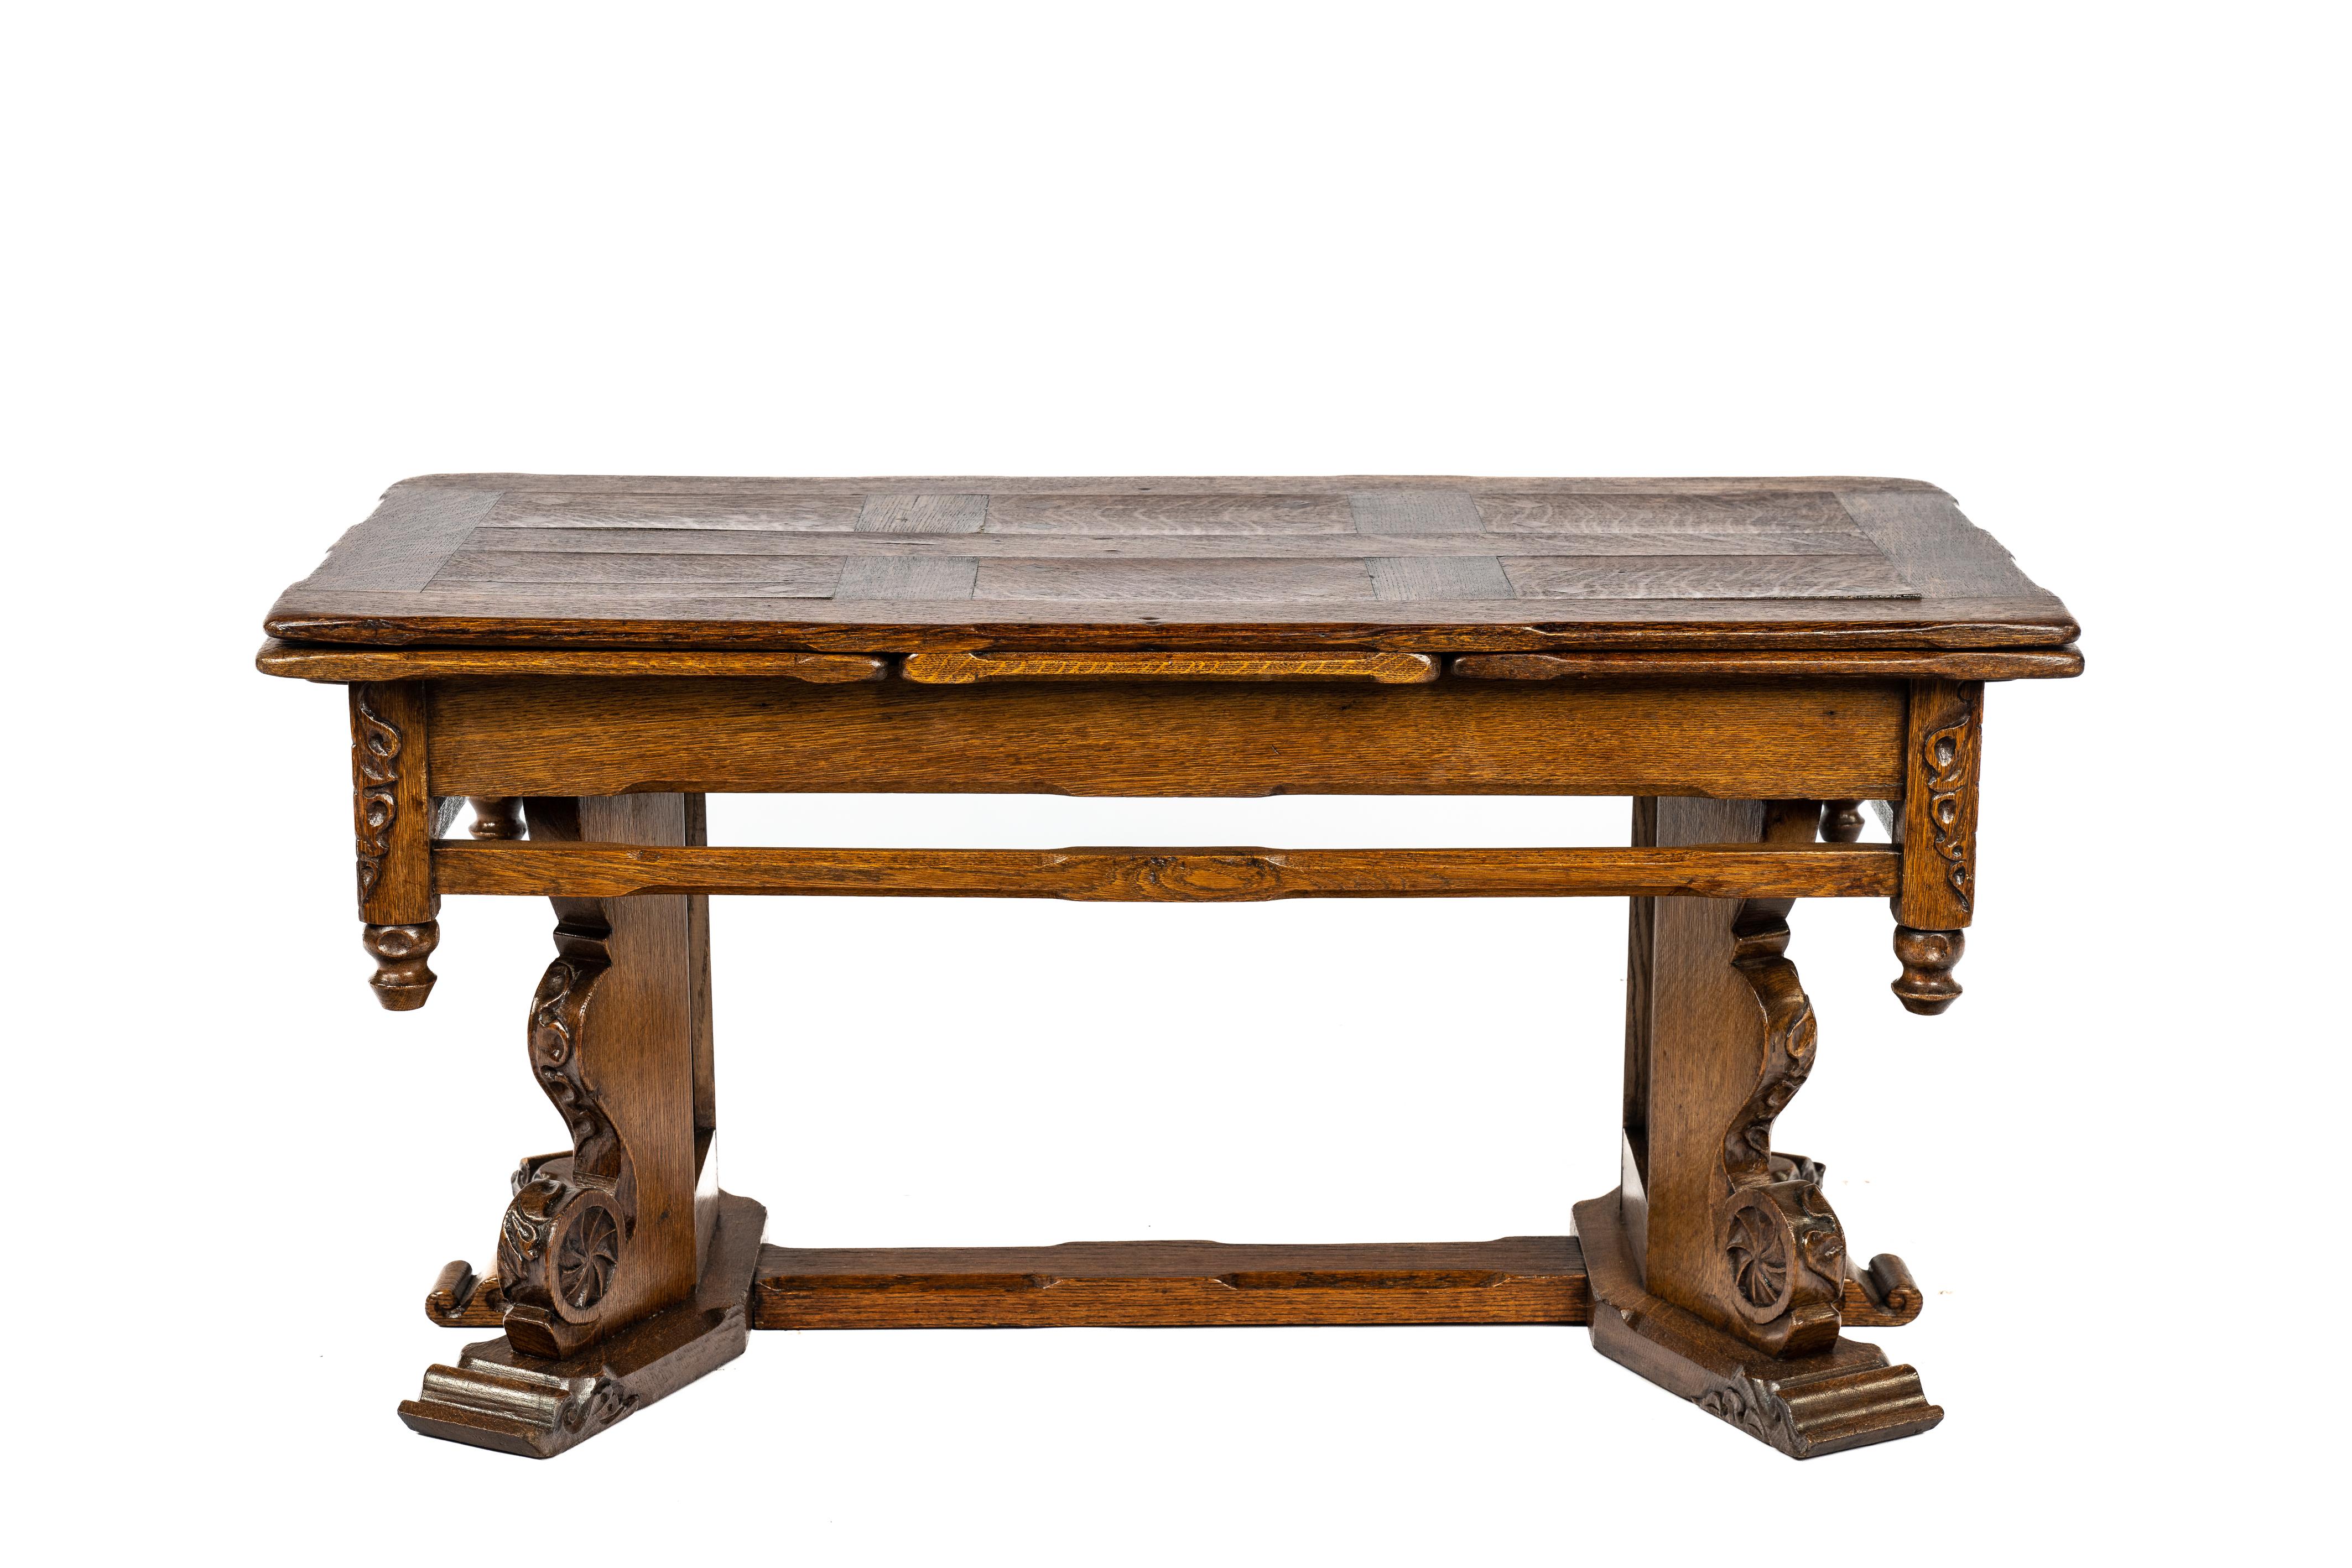 Hand-Carved Vintage European Solid Oak Extendable Warm Honey Color Carved Coffee Table For Sale